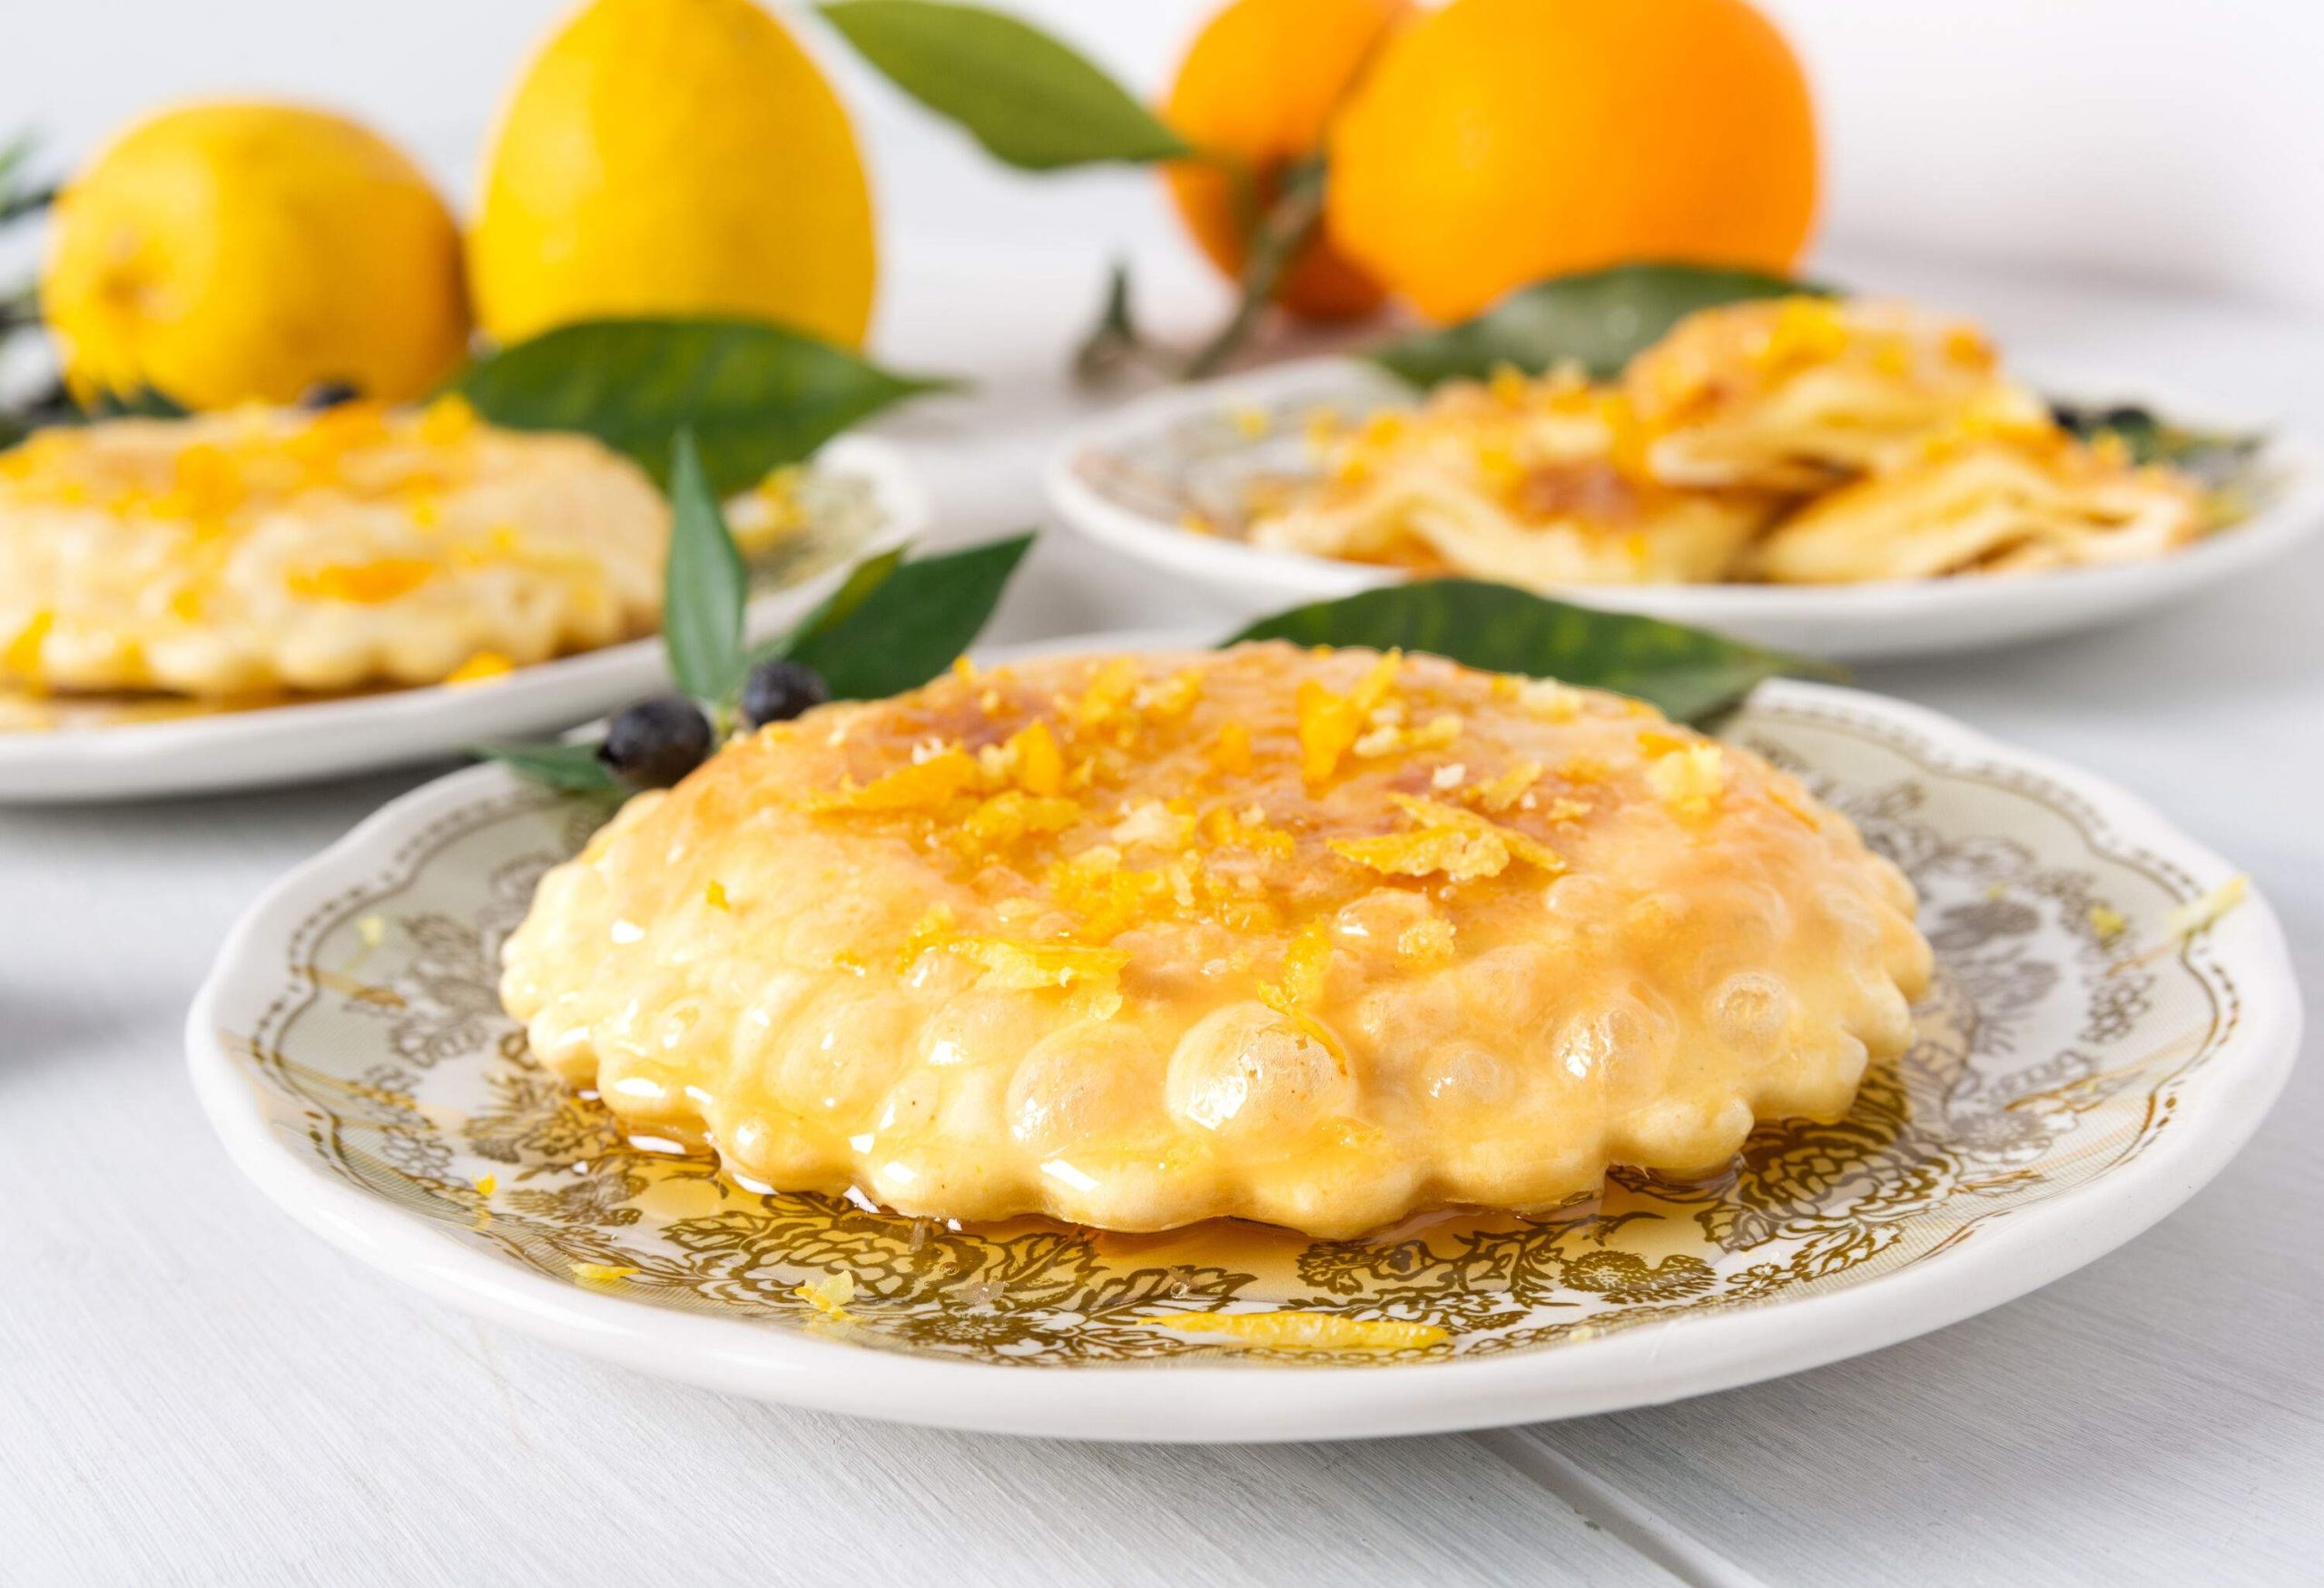 A round deep-fried pastry topped with cheese and drenched in syrup.